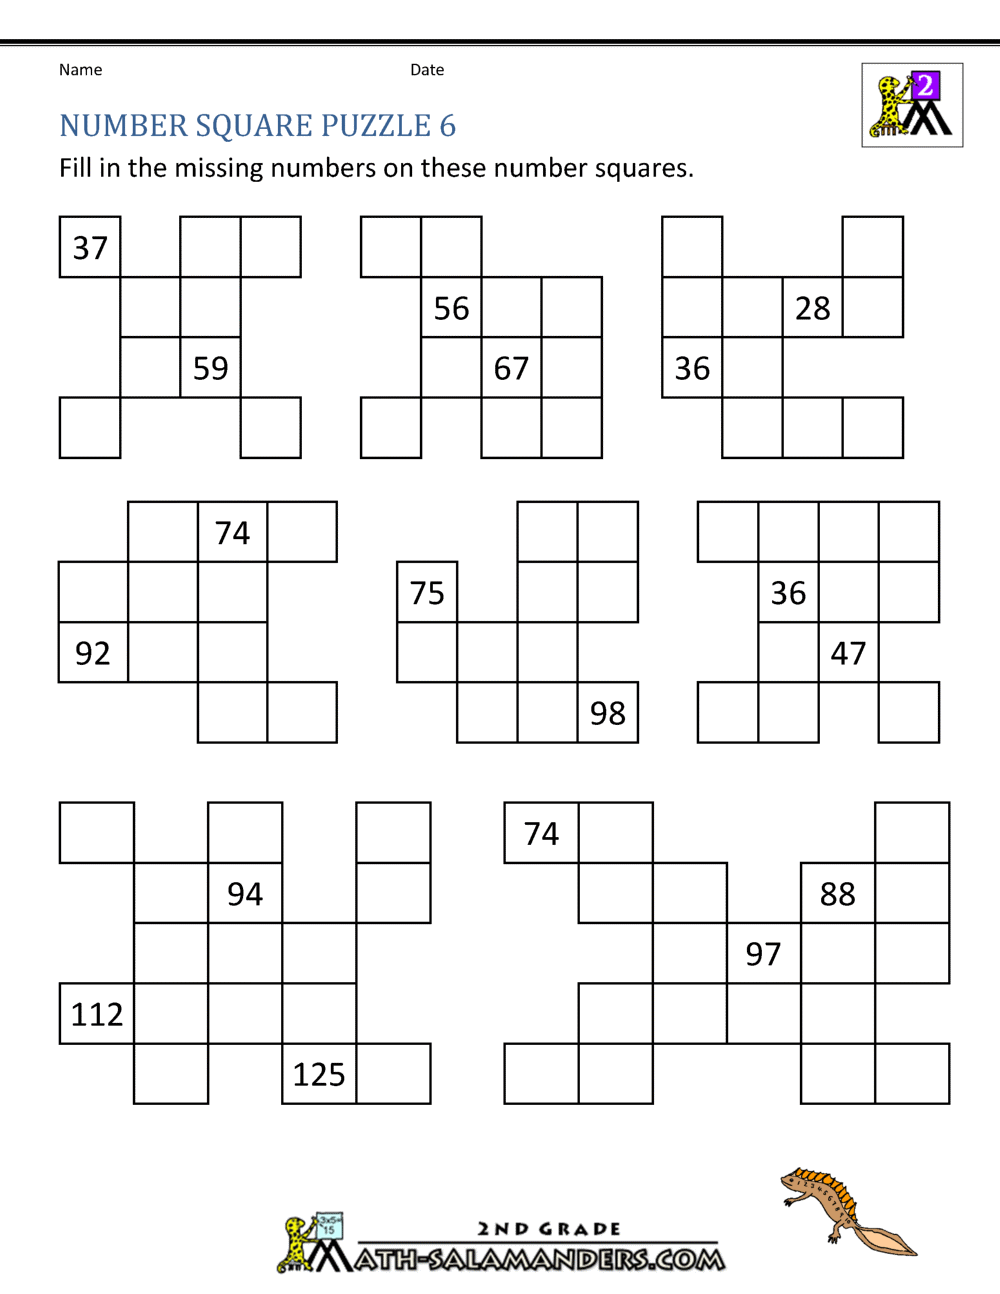 Grade 4 Maths Resources 112 Square Numbers Printable Worksheets Squares Of Numbers From 0 To 9 